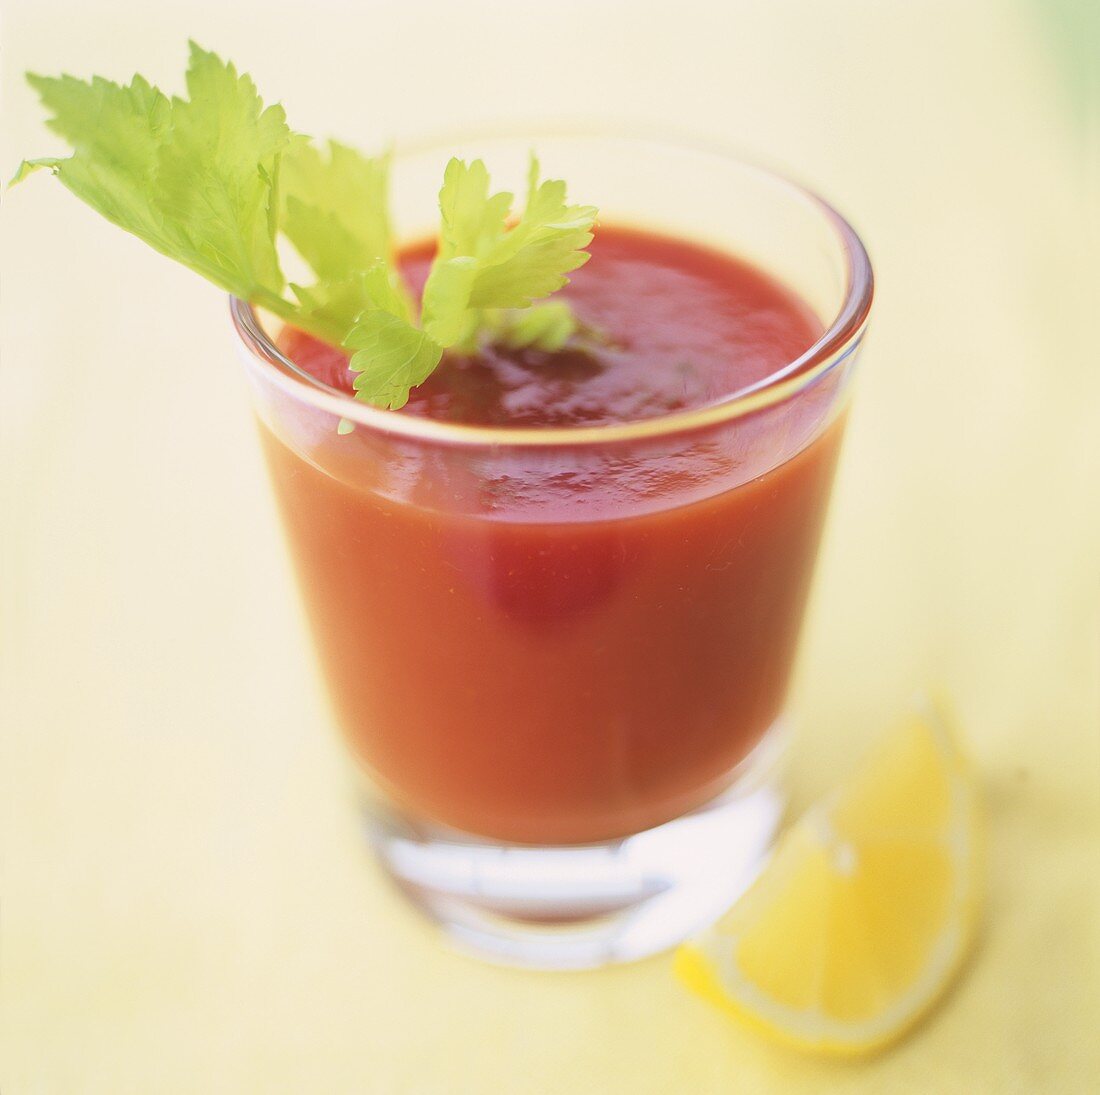 A glass of Bloody Mary with celery and lemon